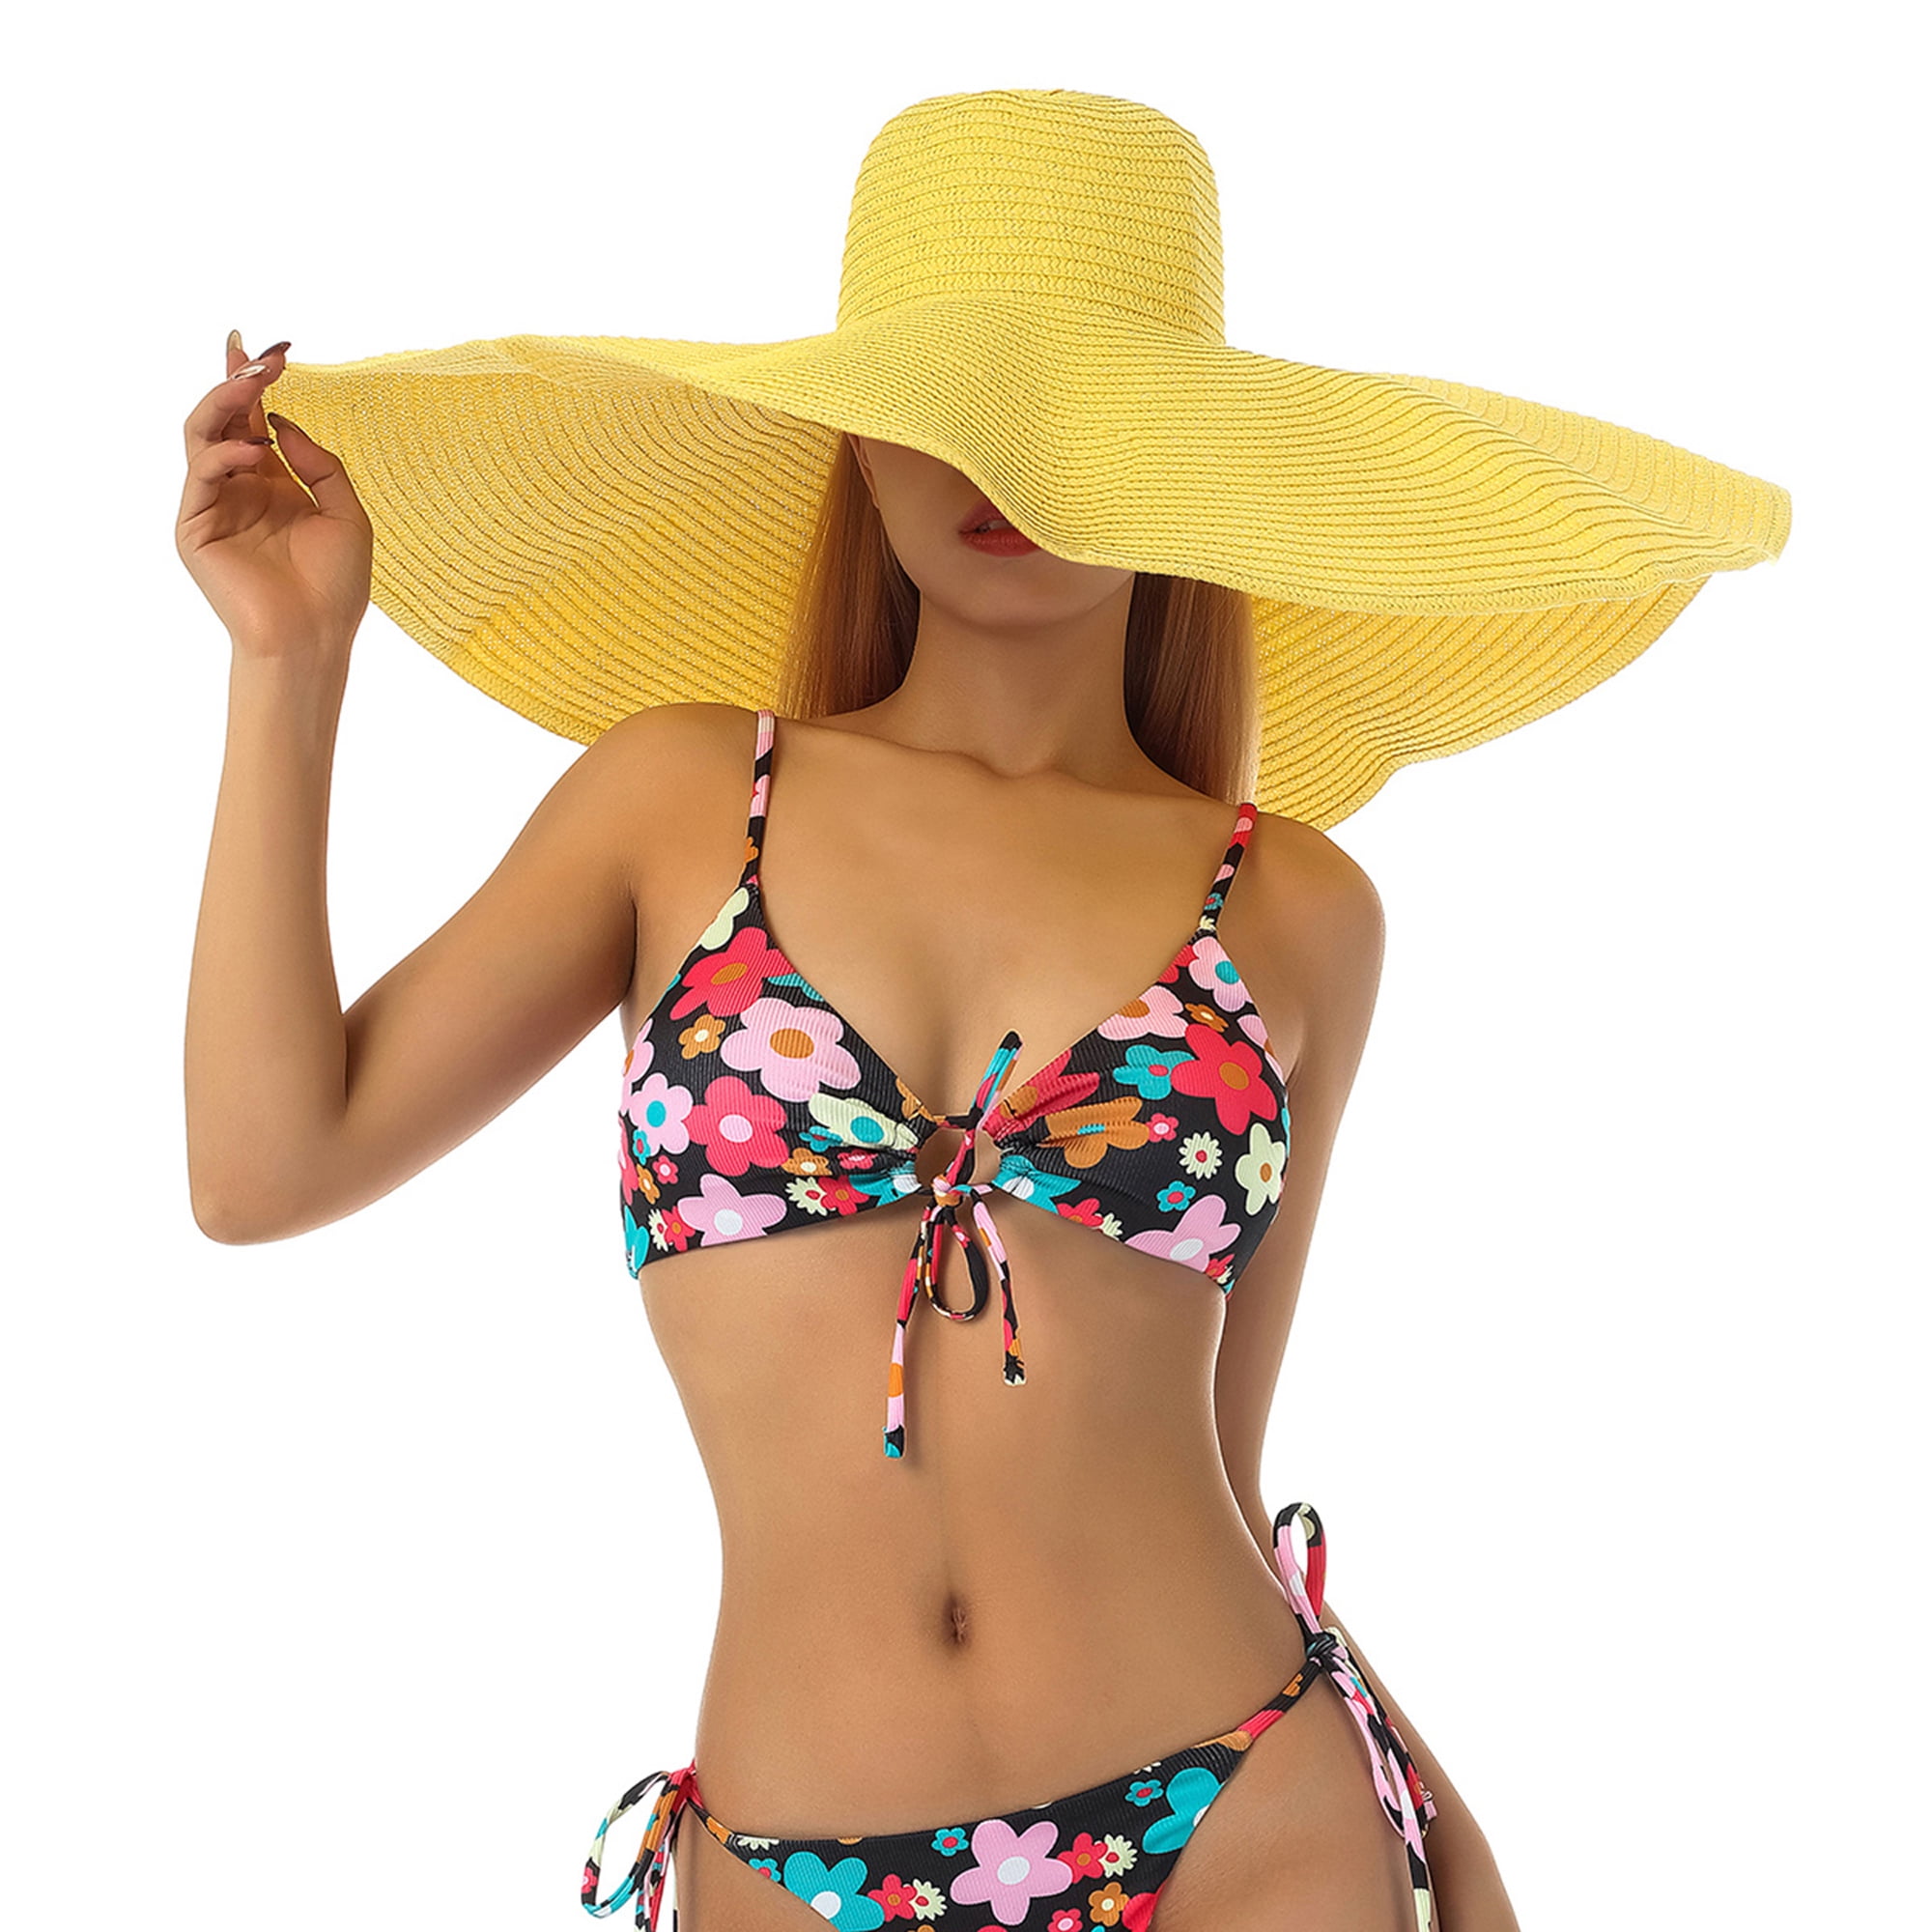 AMILIEe Oversized Beach Hat Large Wide Brim Floppy Sun Hats Big Hat Outdoor UV Protection - Walmart.com